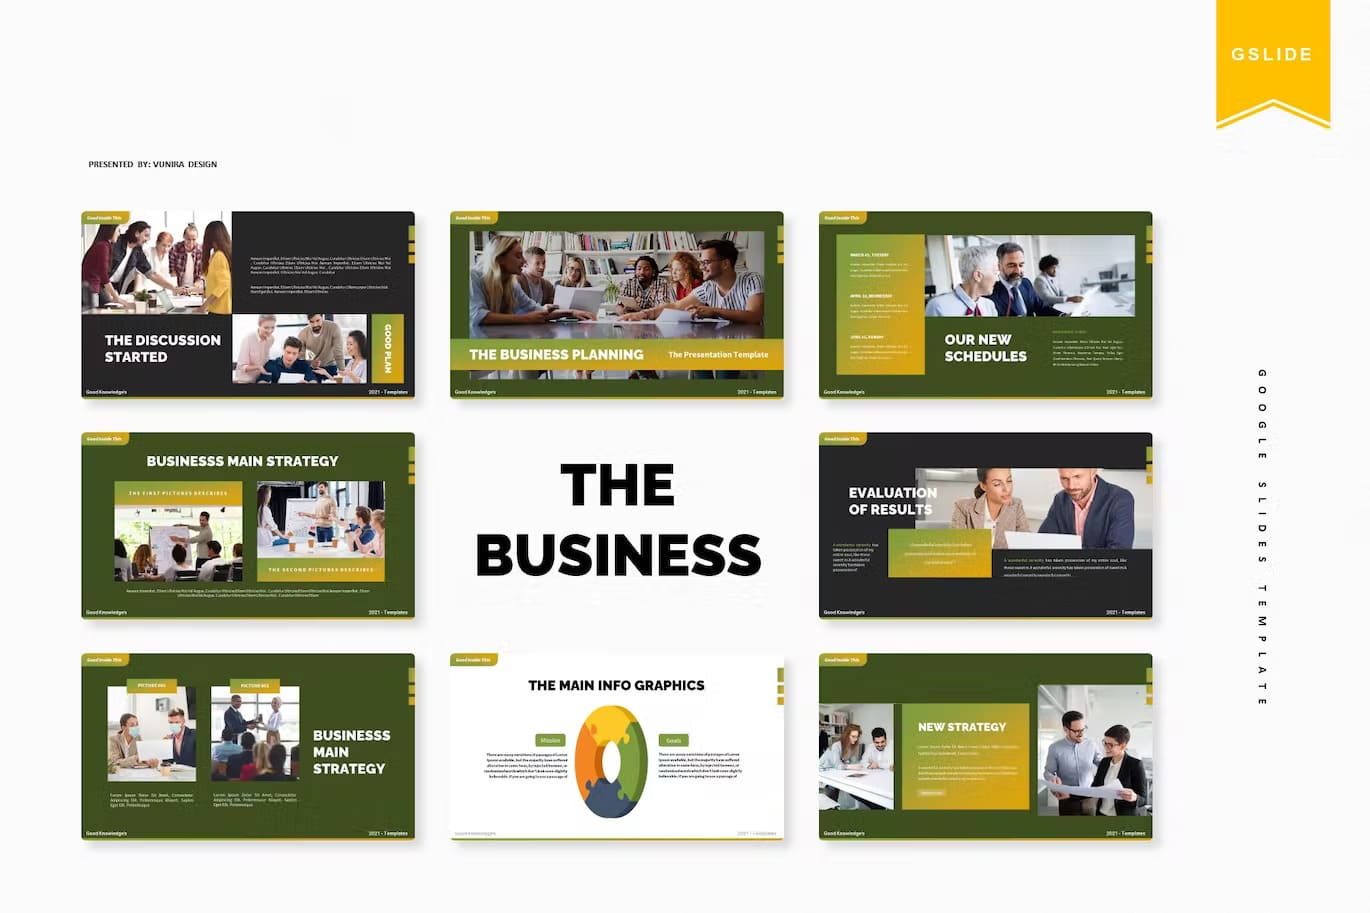 Google Slides template for business planning: The discussion started, the business planning, our new schedules.